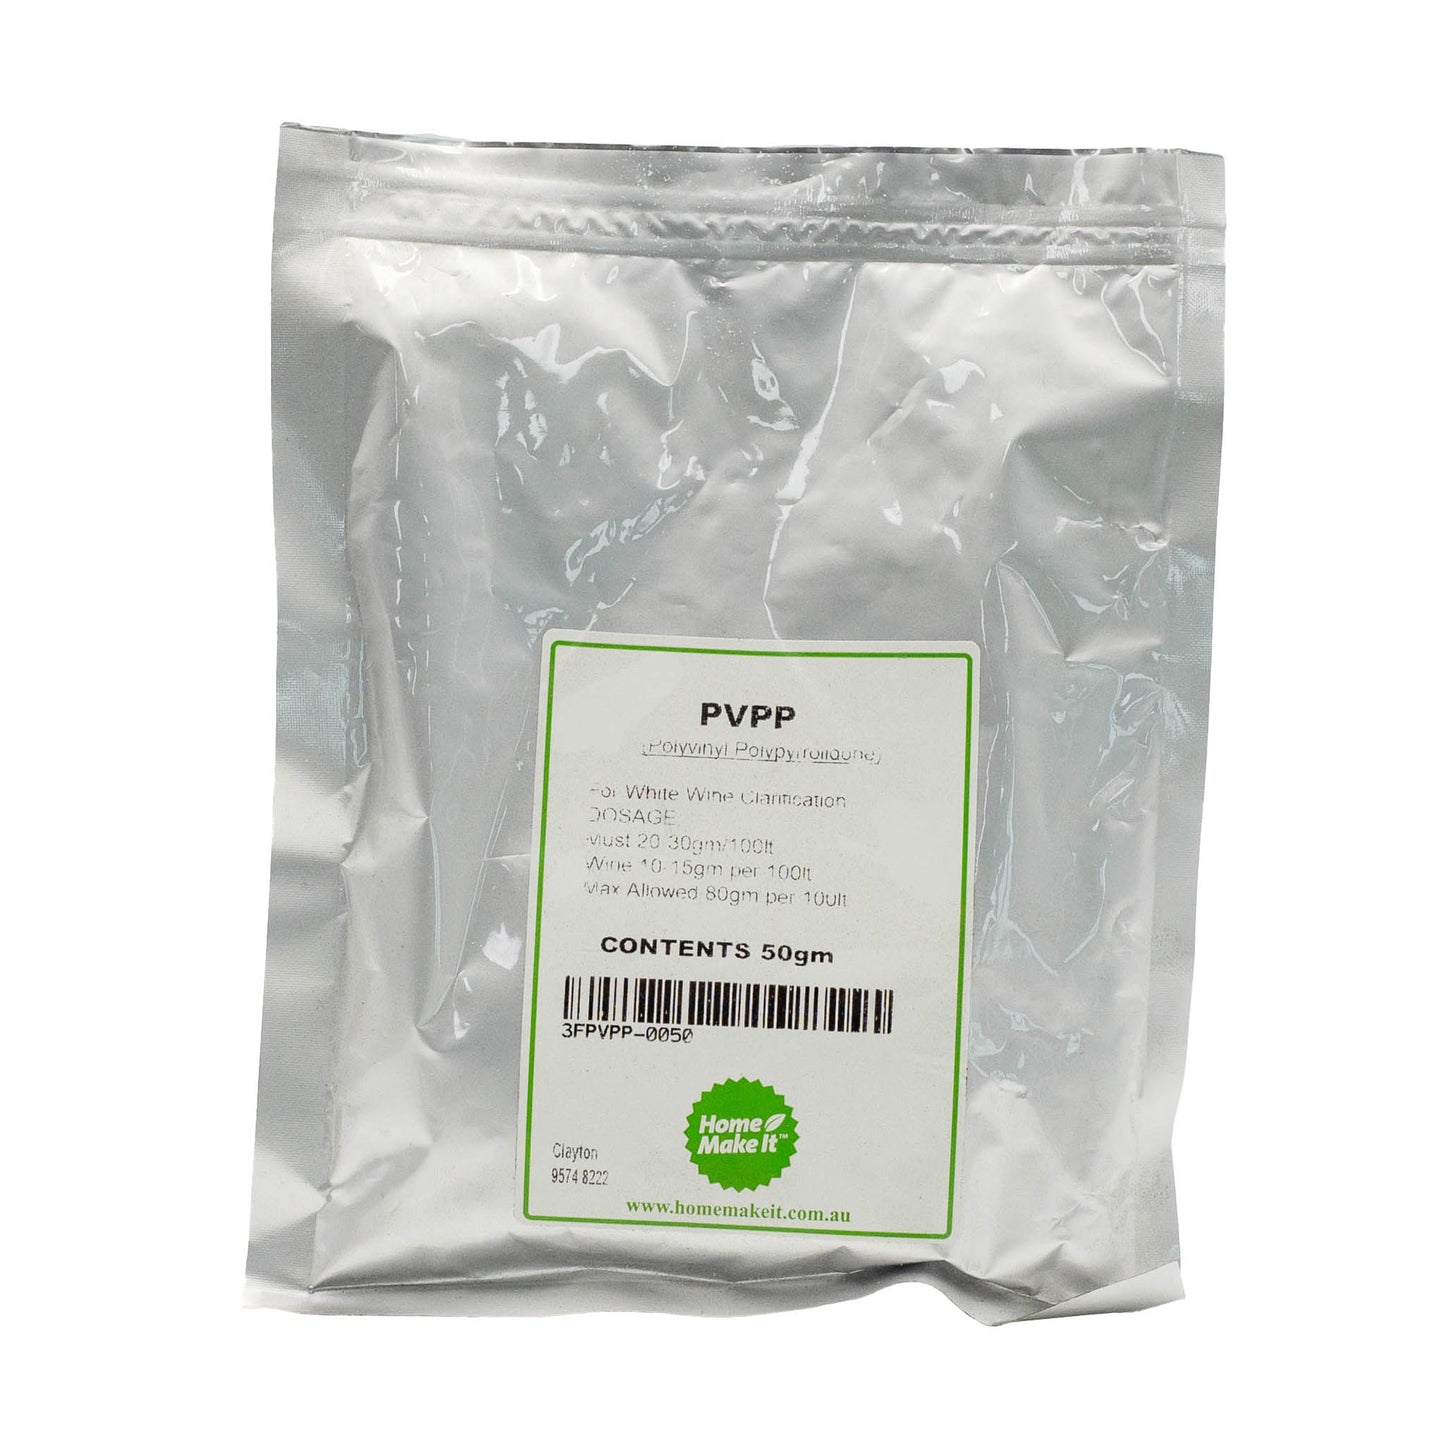 50g packet of PVPP, used for white wine clarification. 